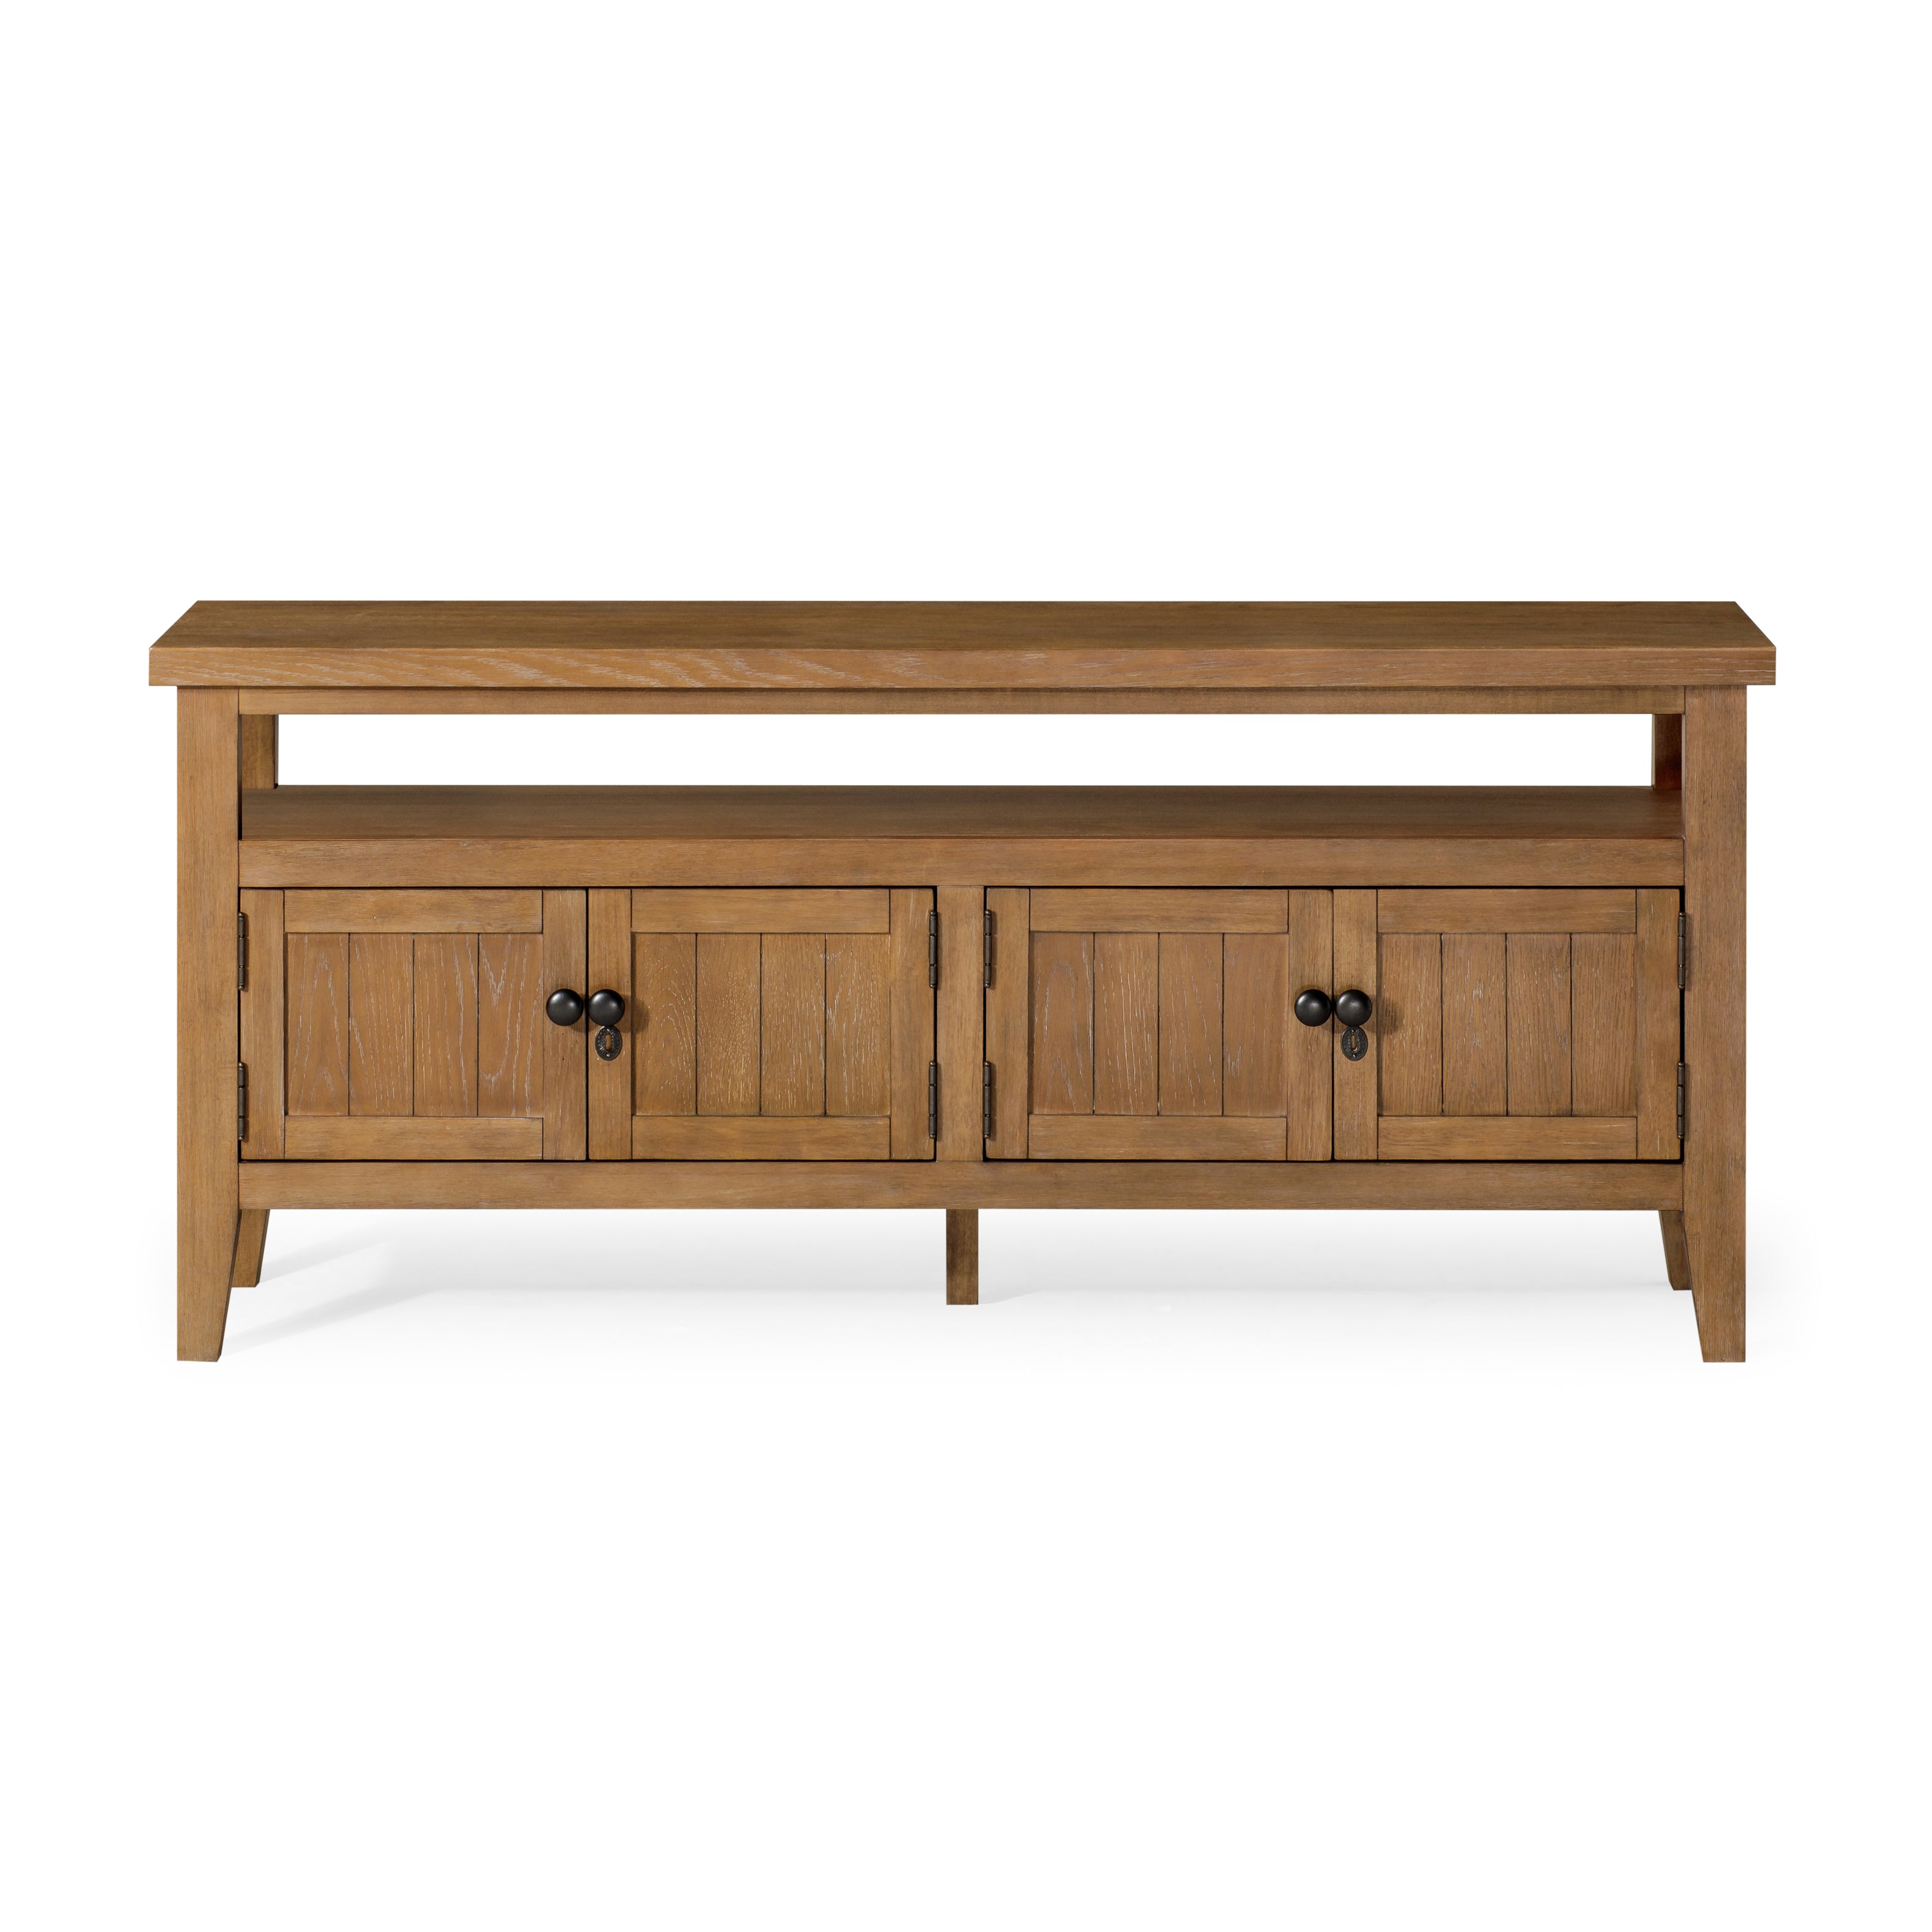 Turner Classical Wooden Media Unit in Antiqued Natural Finish in Media Units by Maven Lane